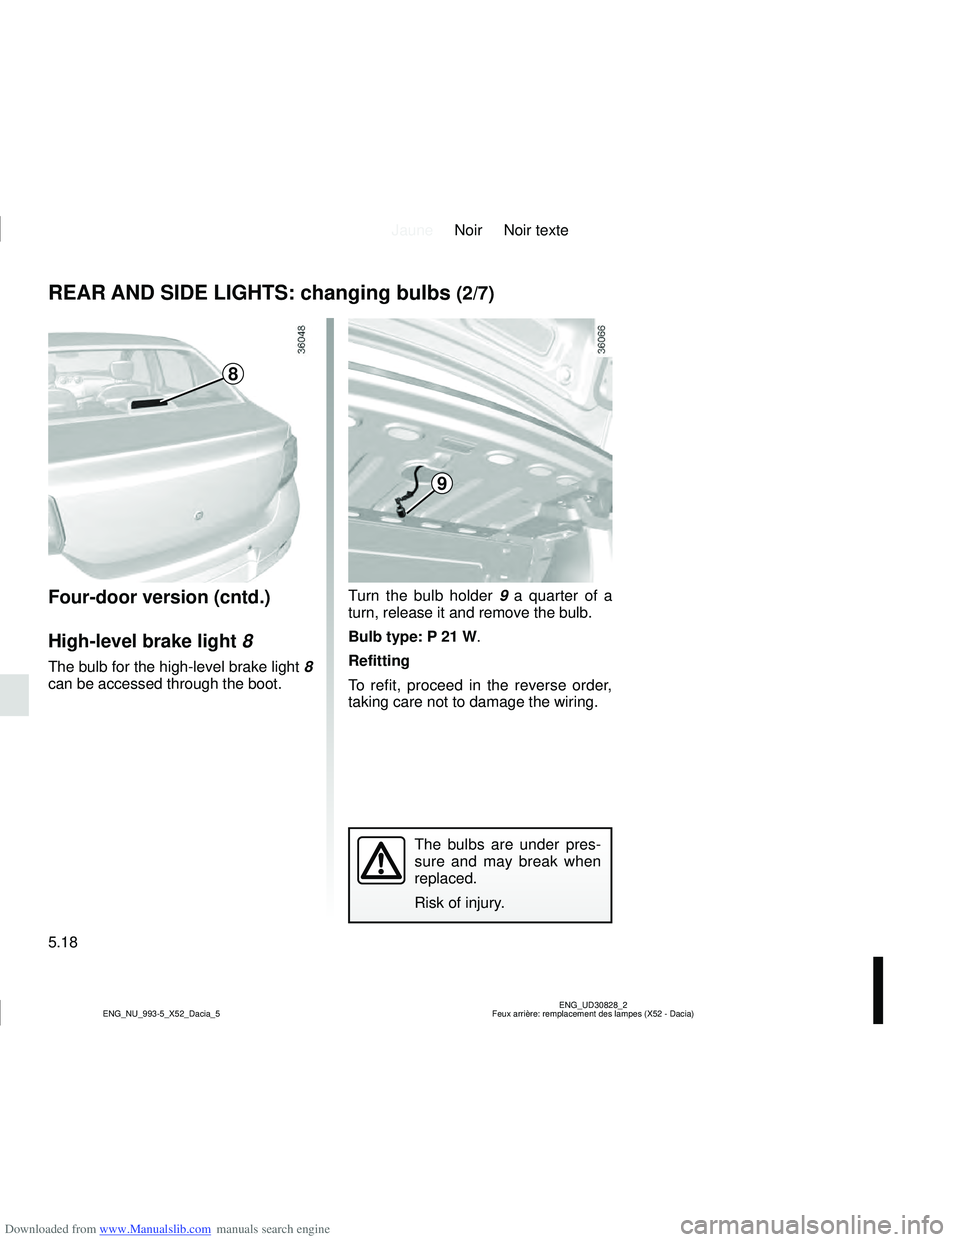 DACIA LOGAN 2021  Owners Manual Downloaded from www.Manualslib.com manuals search engine JauneNoir Noir texte
5.18
ENG_UD30828_2
Feux arrière: remplacement des lampes (X52 - Dacia)
ENG_NU_993-5_X52_Dacia_5
REAR AND SIDE LIGHTS: cha